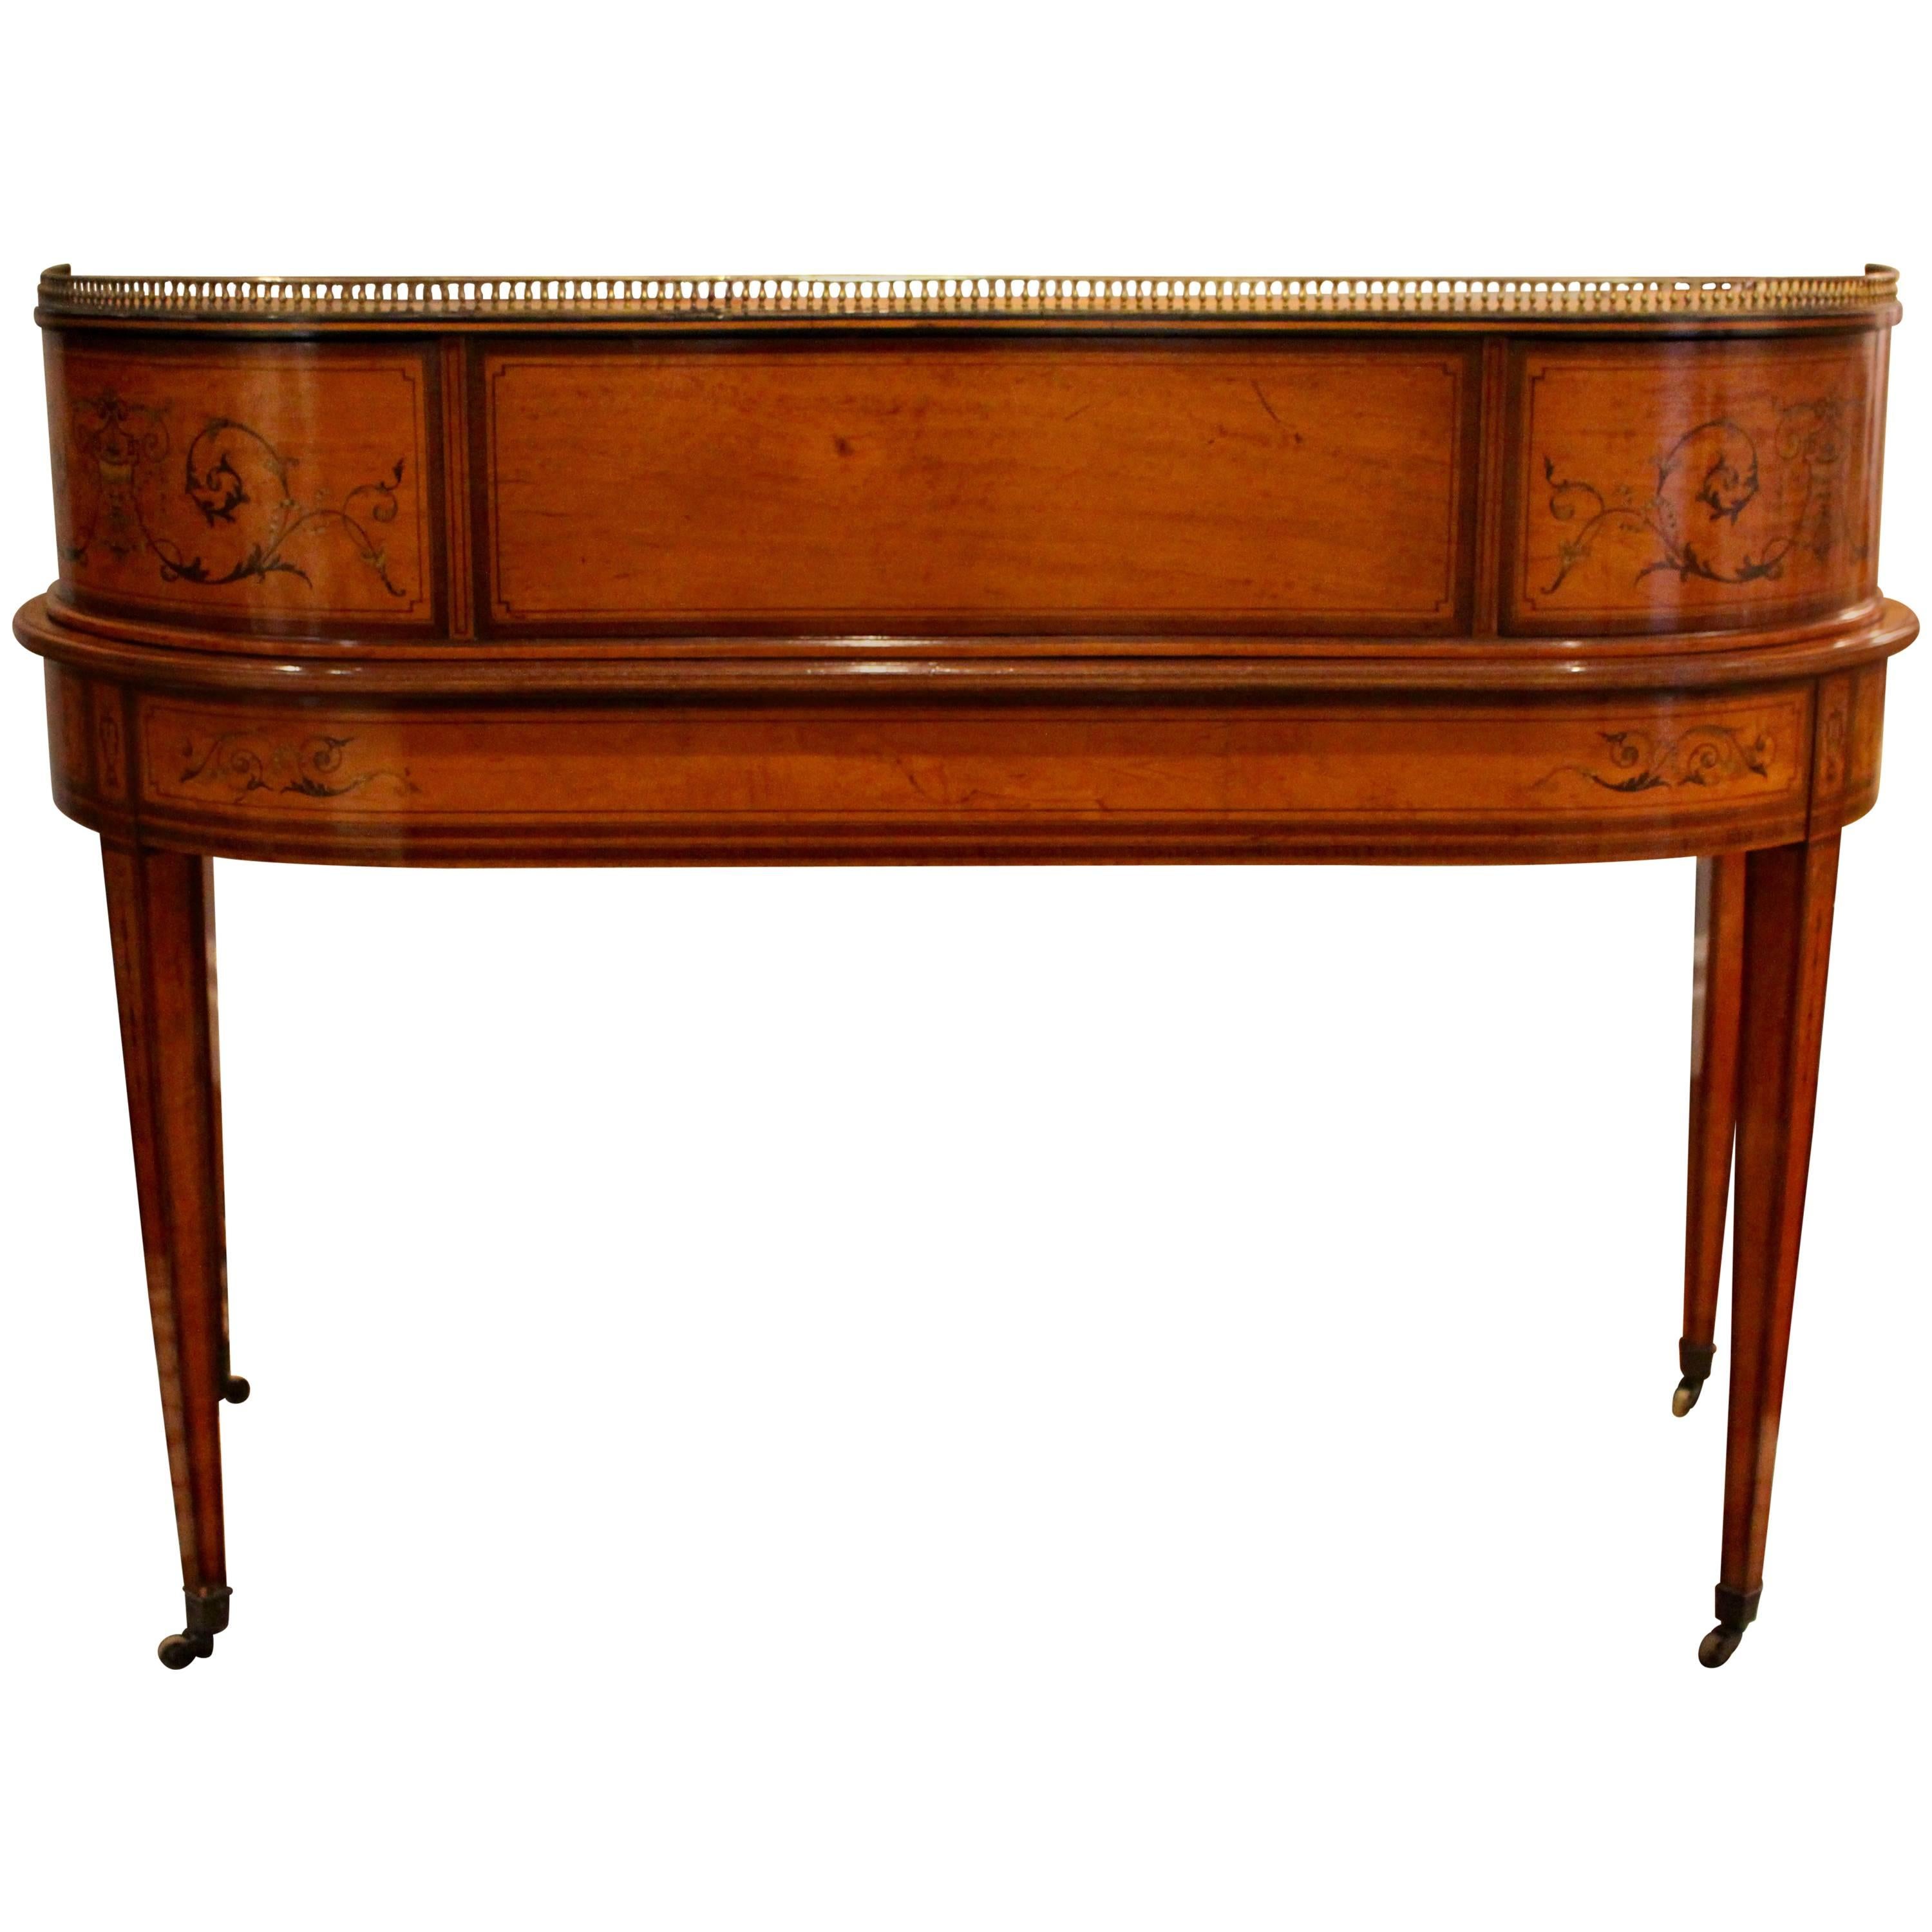  Georgian Adams-Style Carlton House Marquetry Inlaid Desk by Edwards and Roberts For Sale